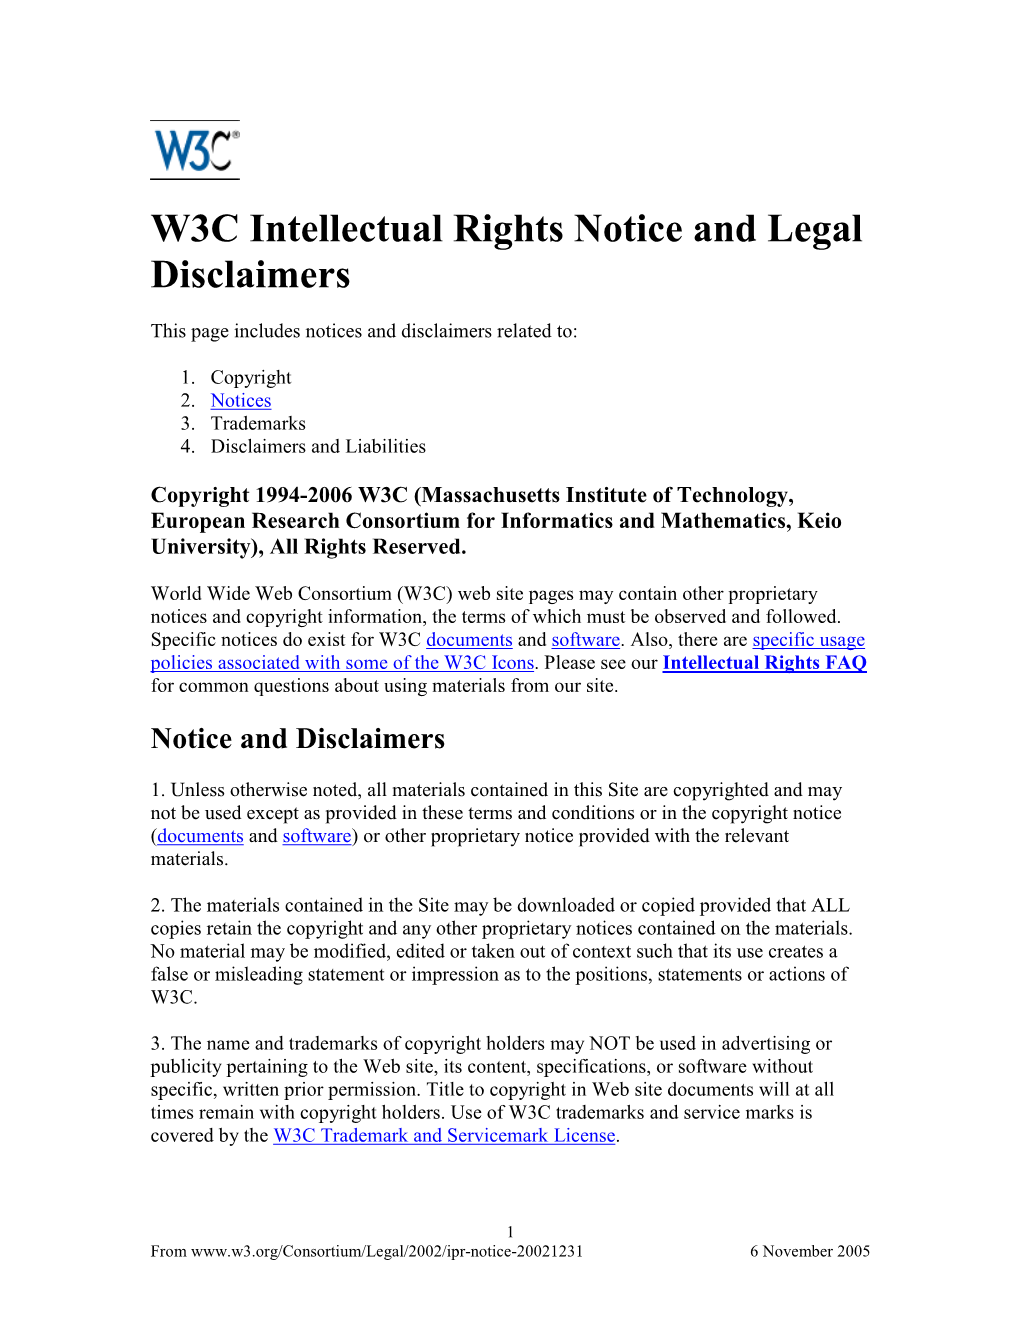 W3C Intellectual Rights Notice and Legal Disclaimers